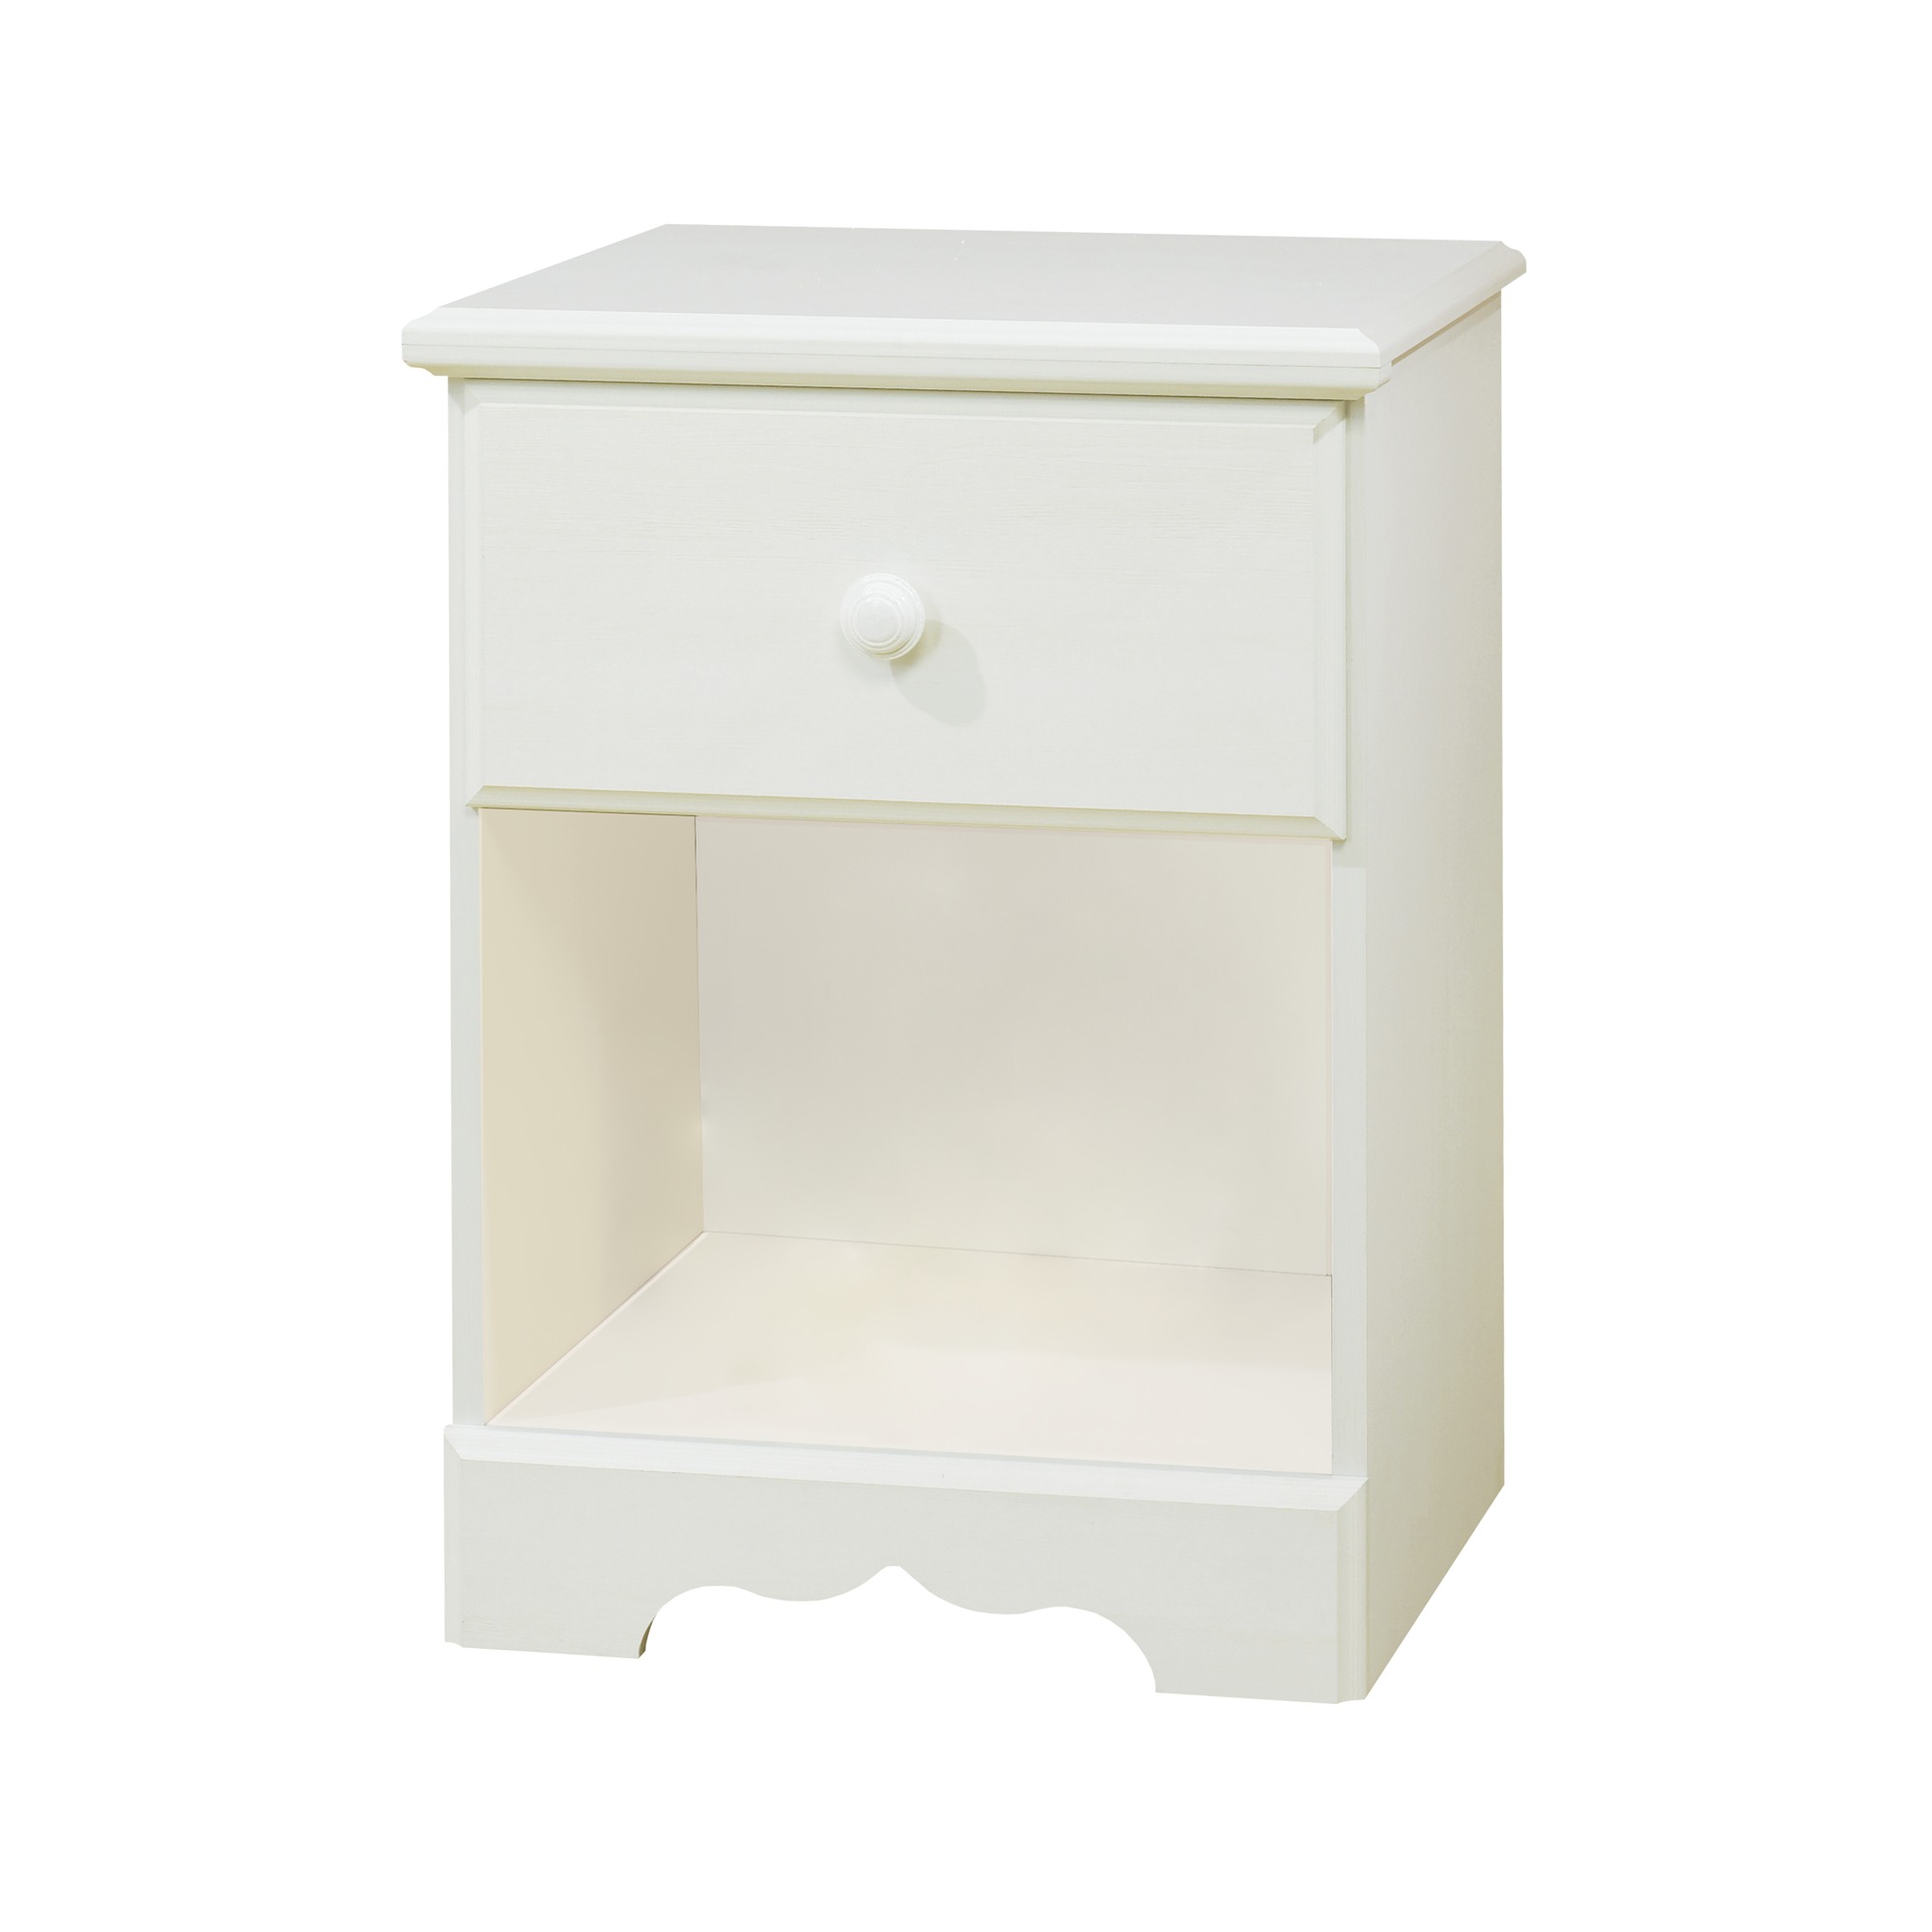 South Shore Summer Breeze Coastal 1-Drawer Nightstand with Storage, White Wash - image 2 of 8